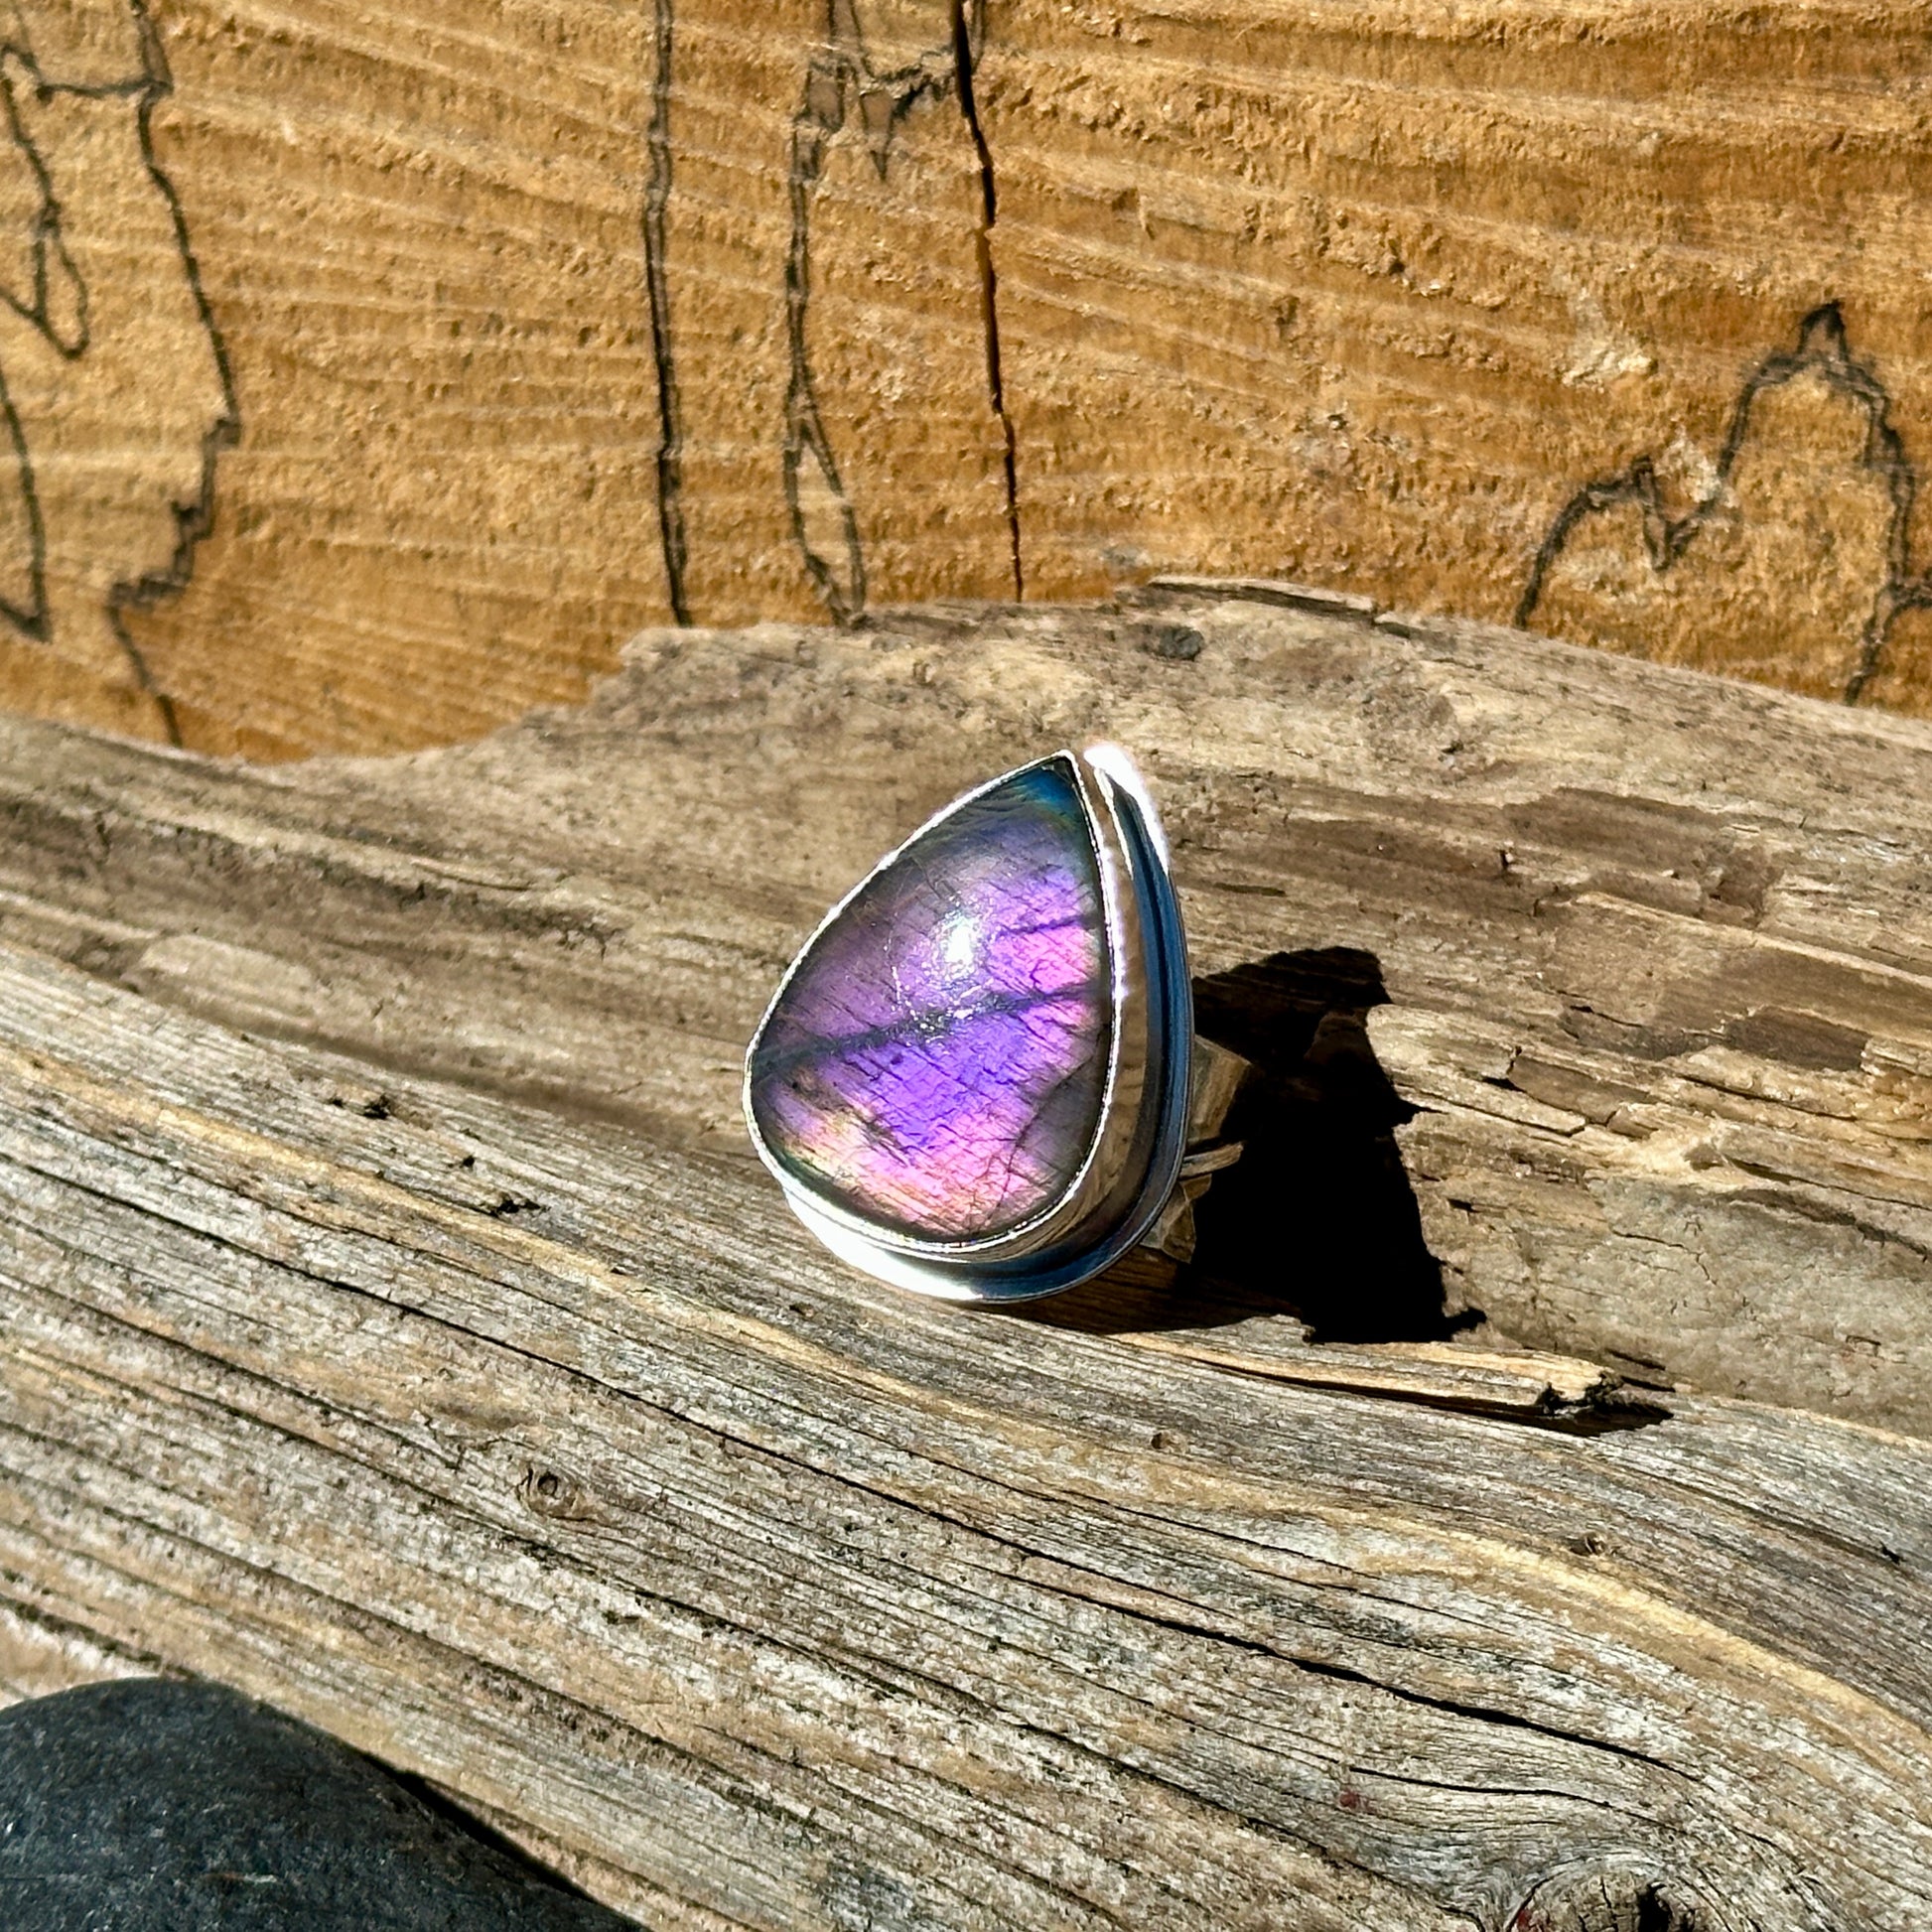 one of a kind silver ring